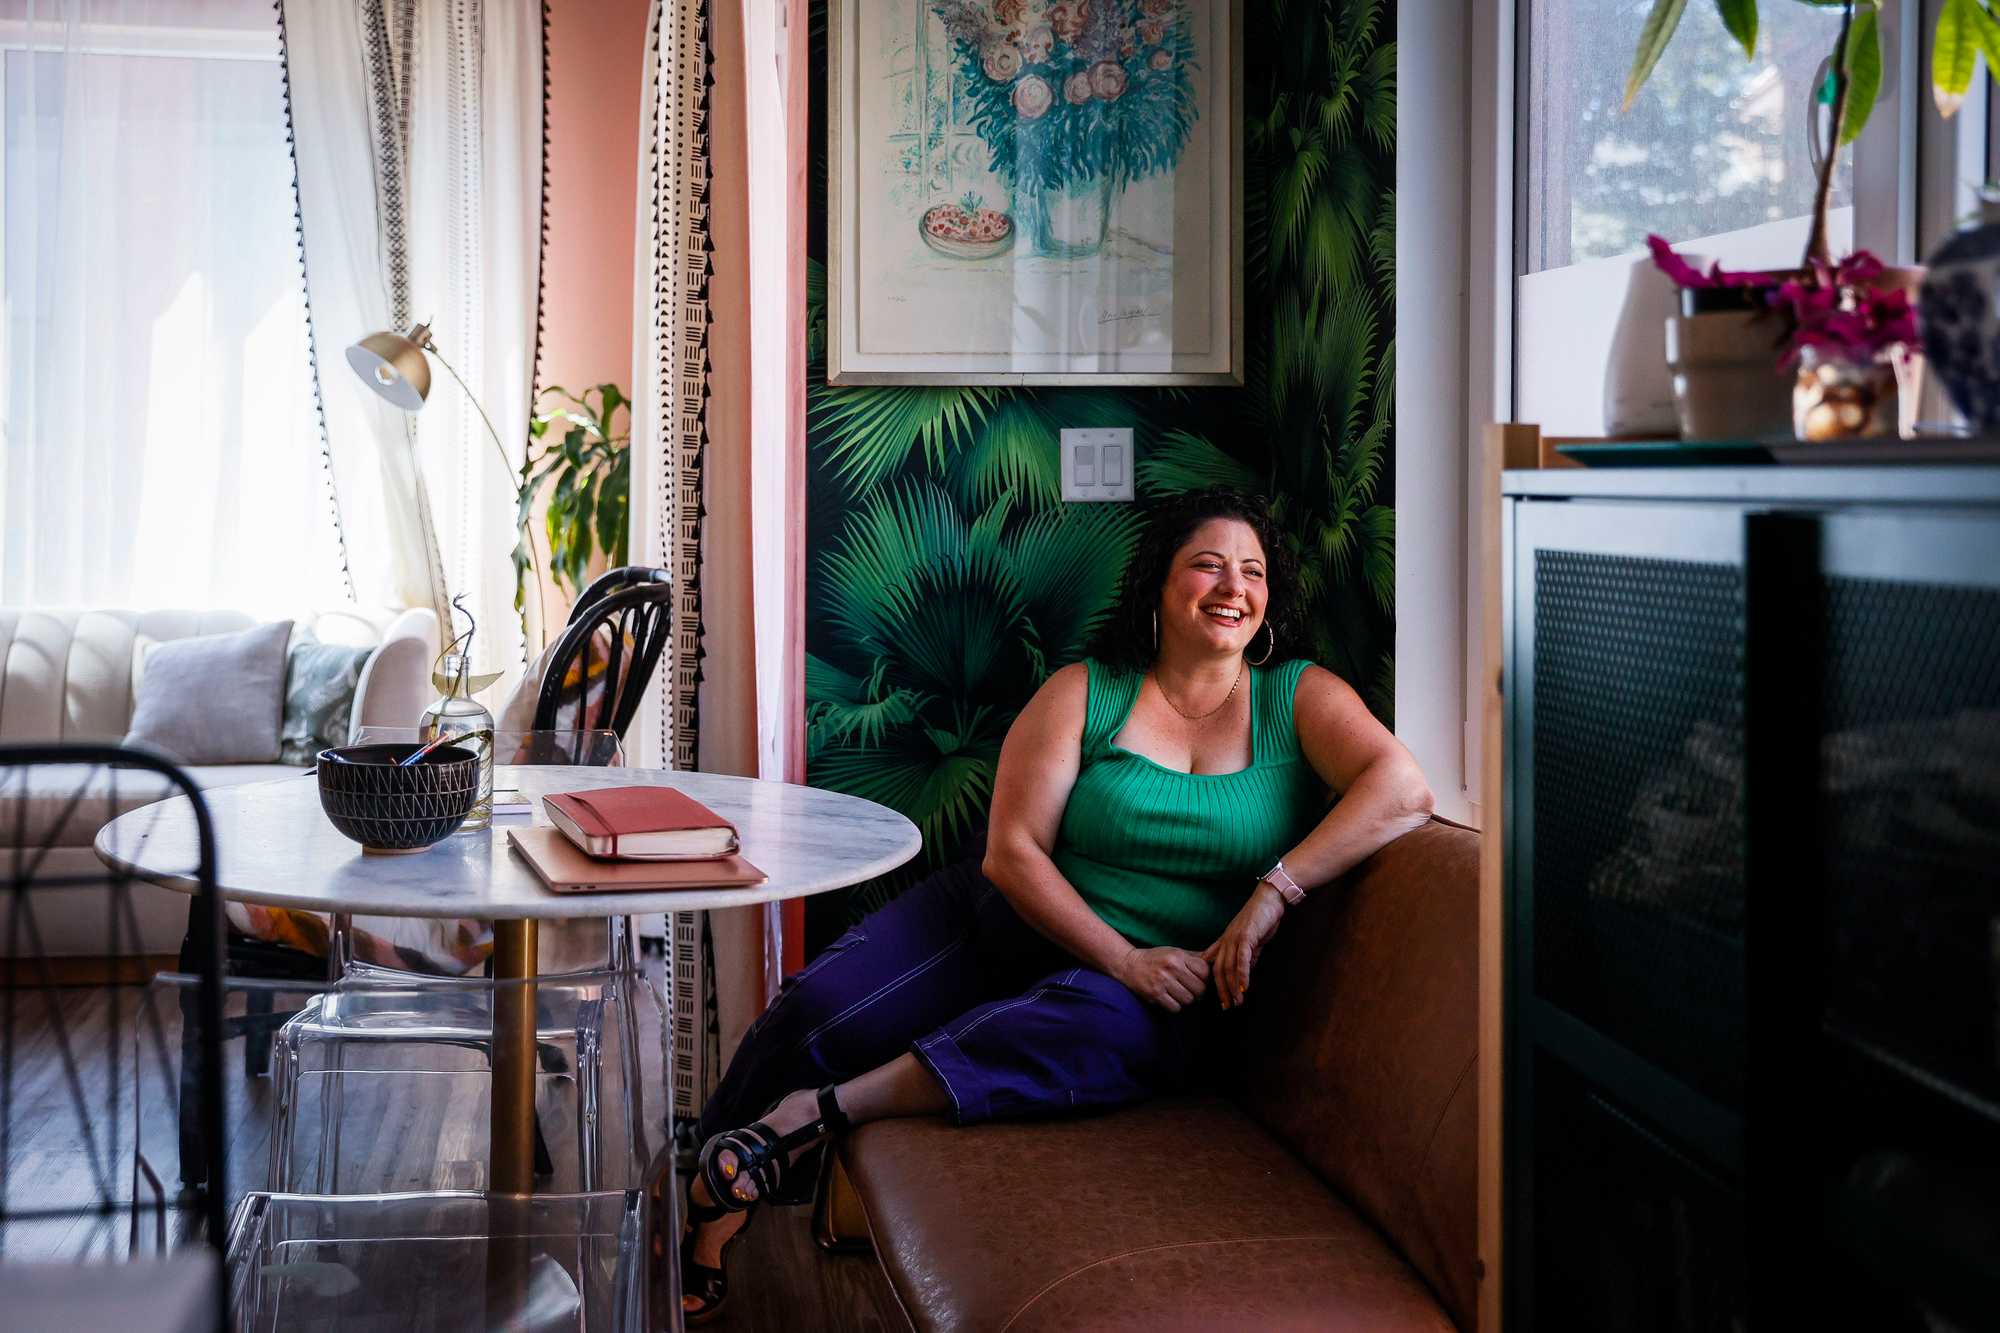 "It feels amazing," said Denise Delgado, executive director of the nonprofit Egleston Square Main Street, of owning her own home. Delgado won a lottery to buy the income-restricted Nubian Square condo.

